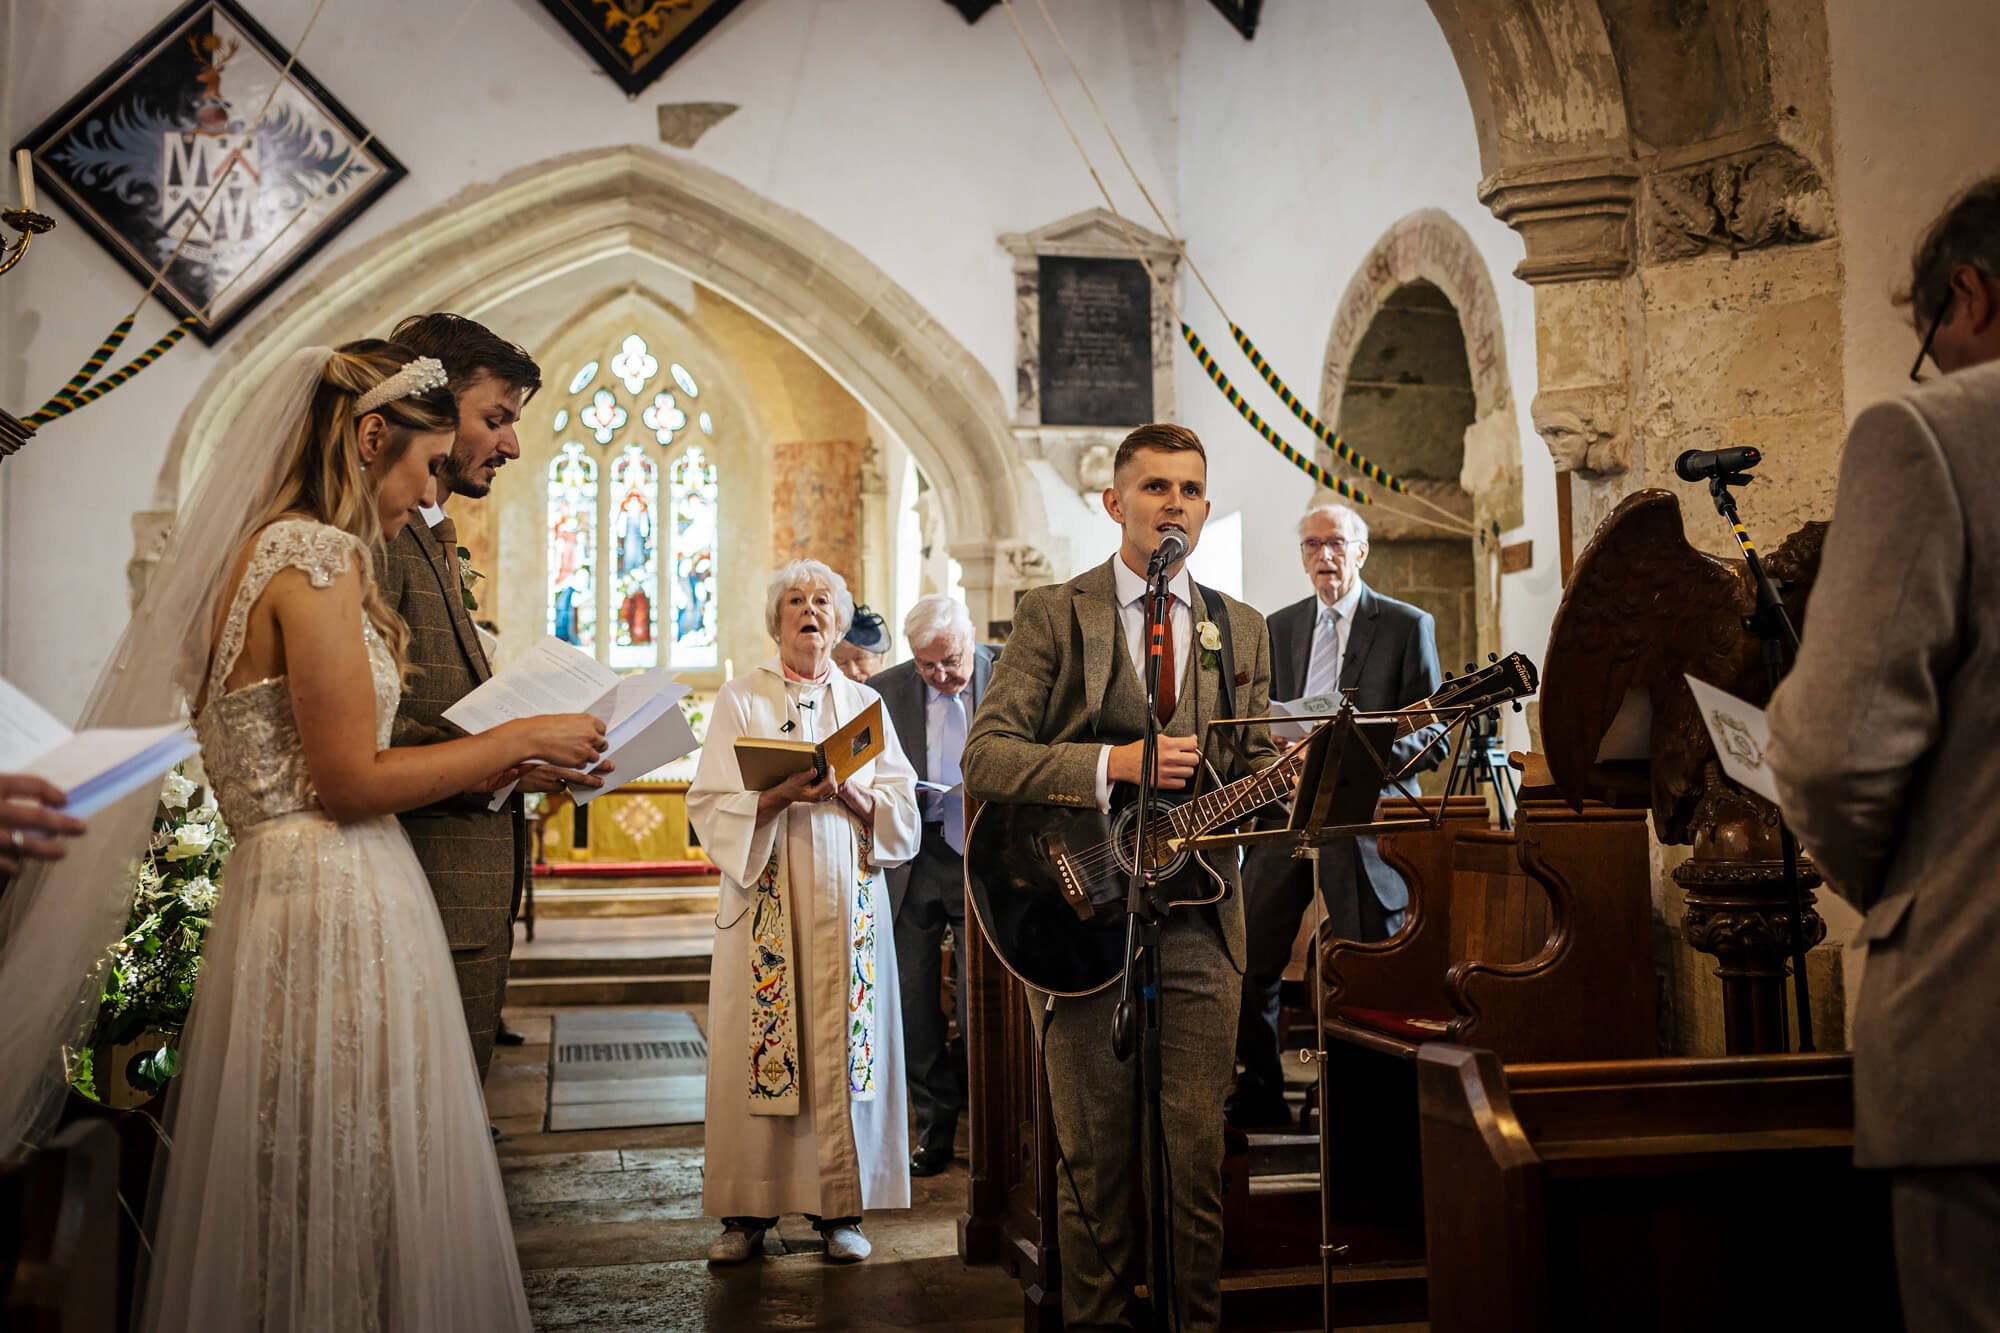 Singer in the church plays guitar at a wedding